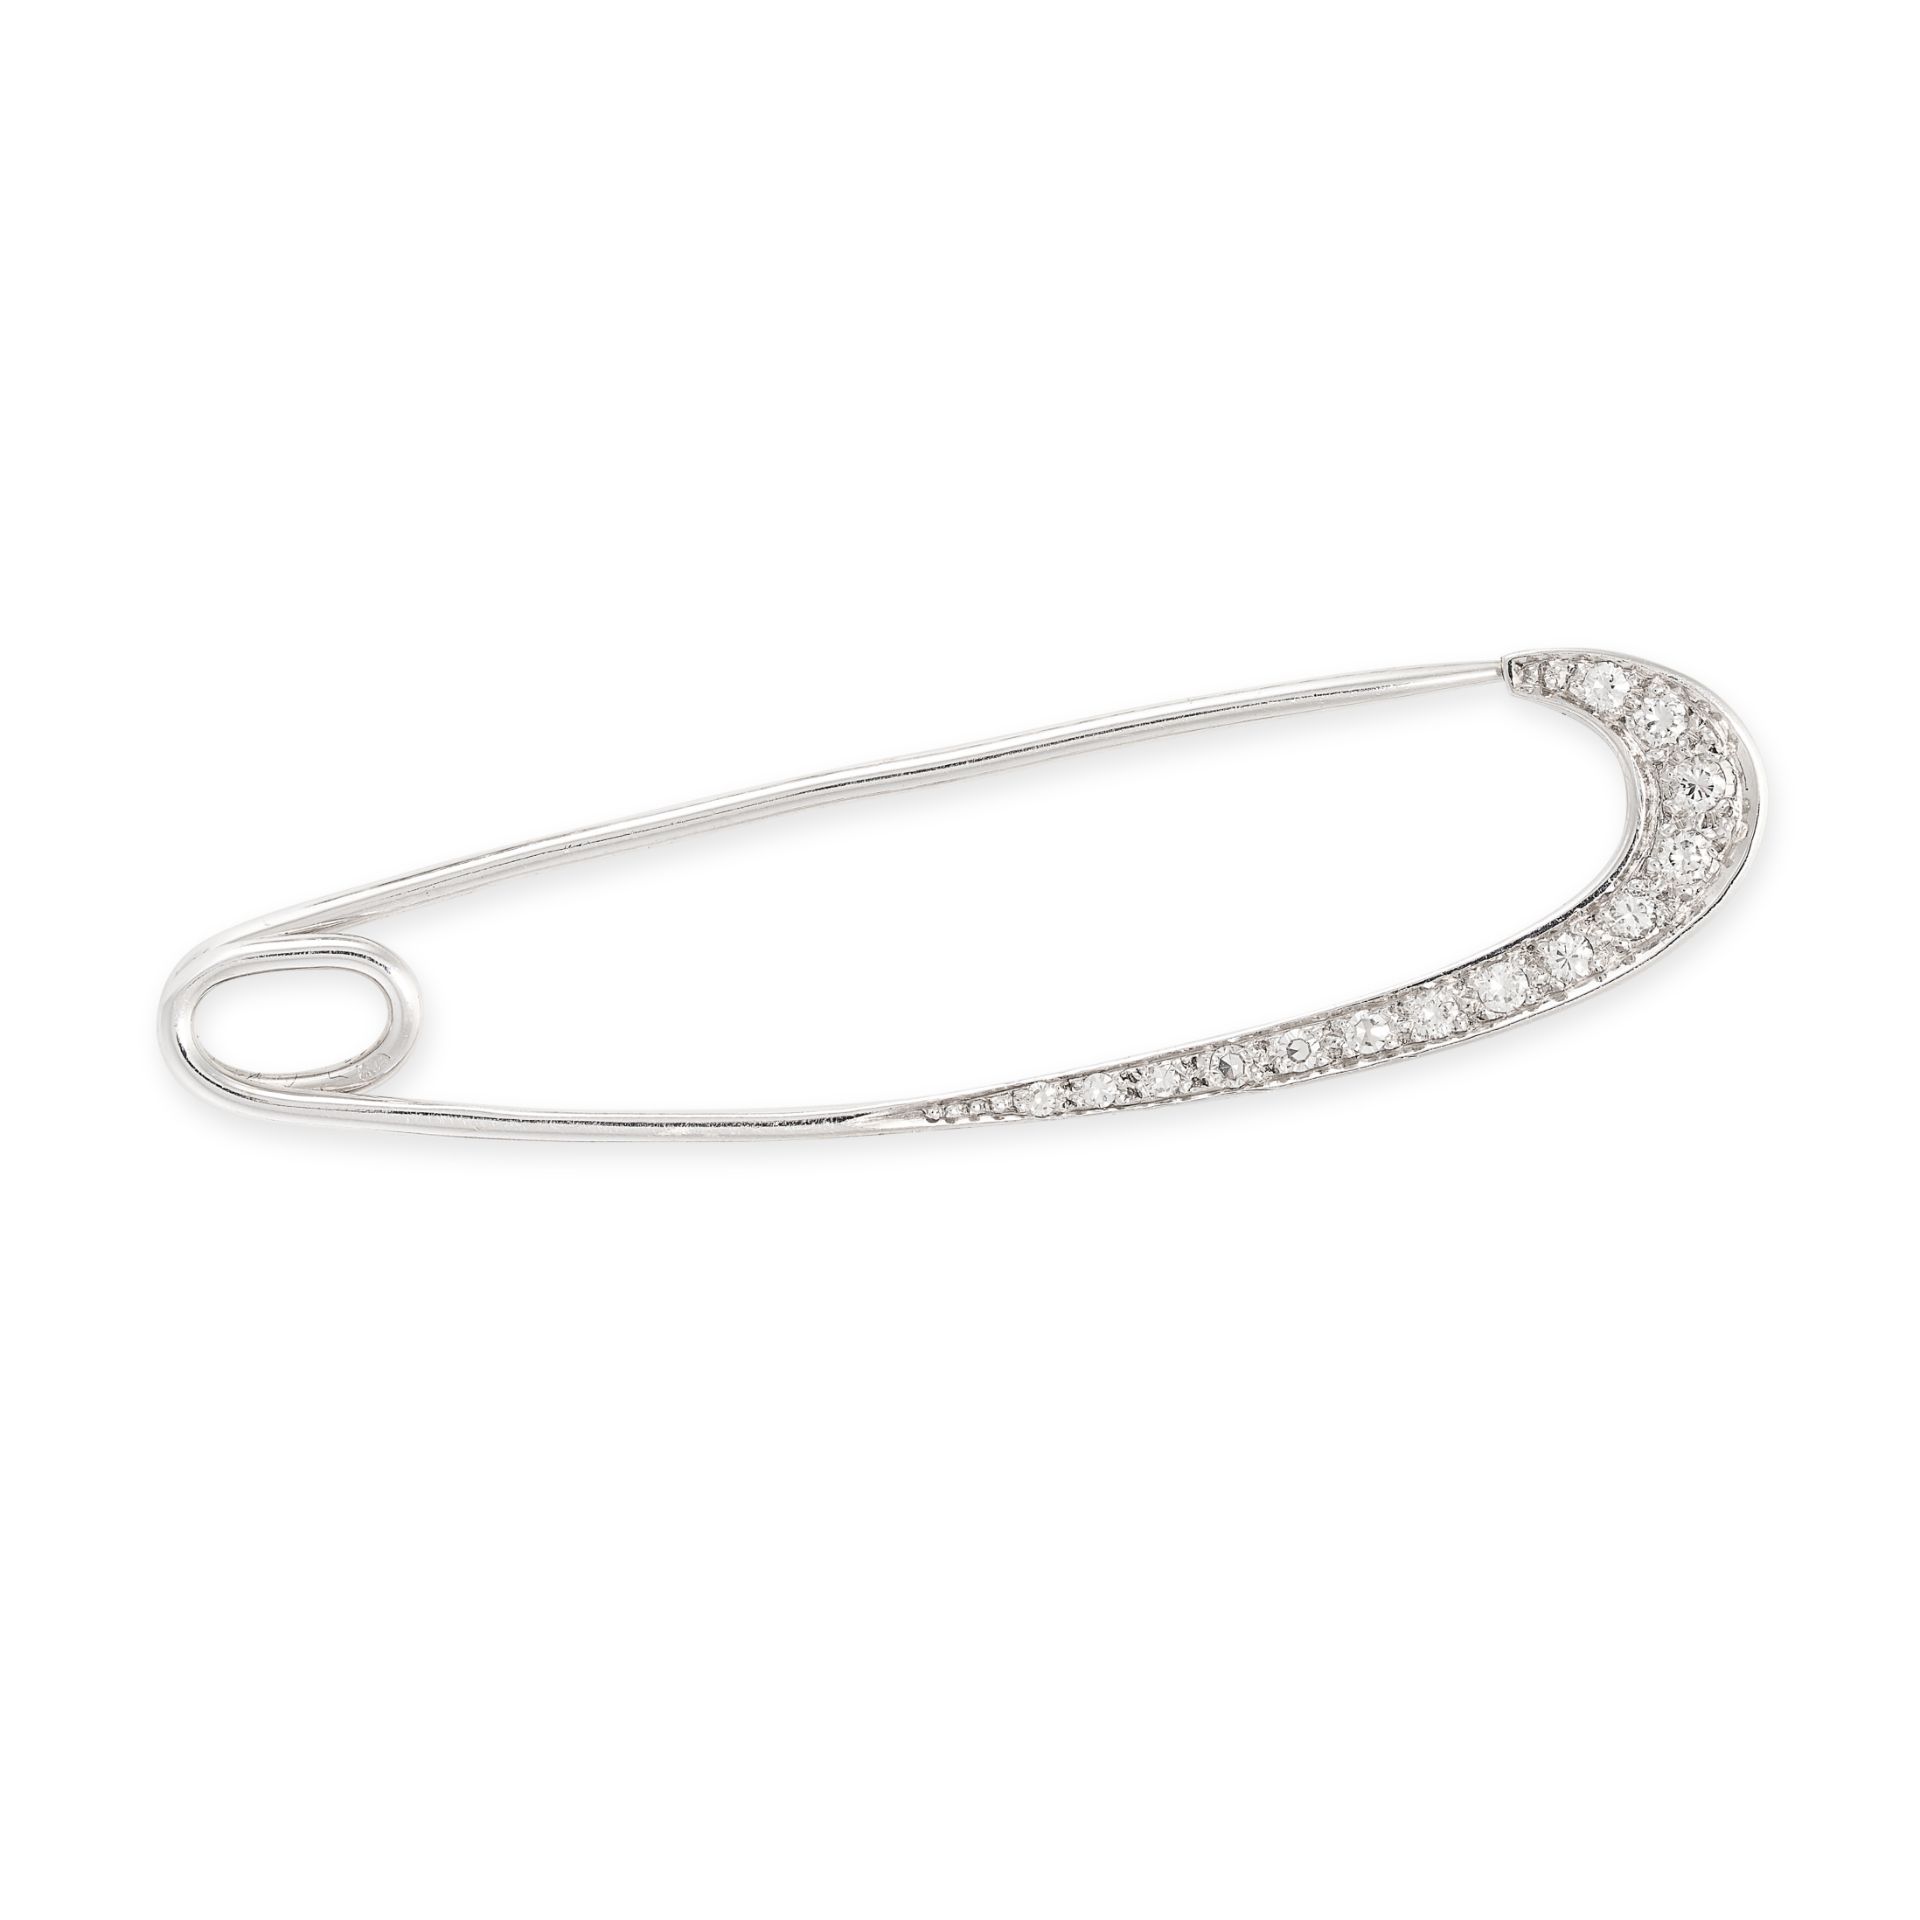 A DIAMOND SAFETY PIN BROOCH in 18ct gold, the pin set with round brilliant cut diamonds, stamped